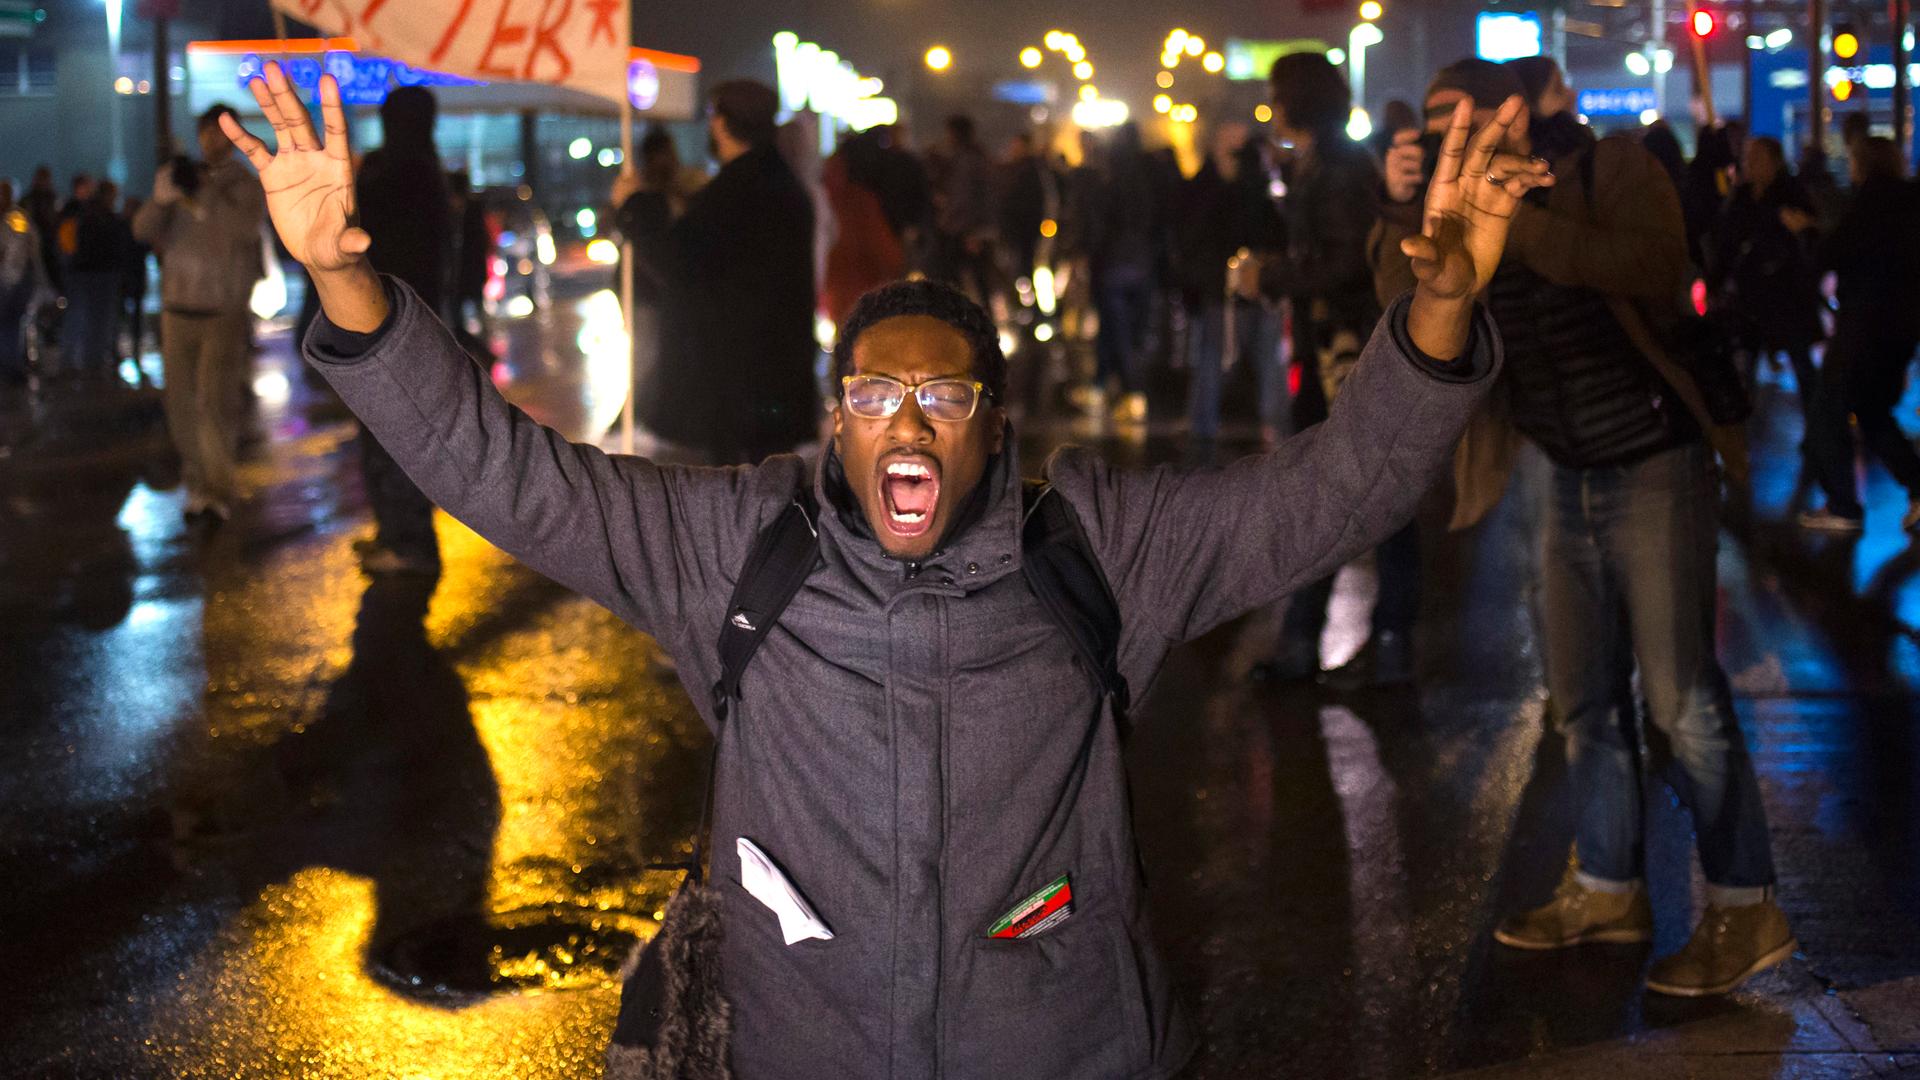 A protester shouts with both his hands in the air while marching through a suburb of St. Louis, Missouri, on November 23, 2014.